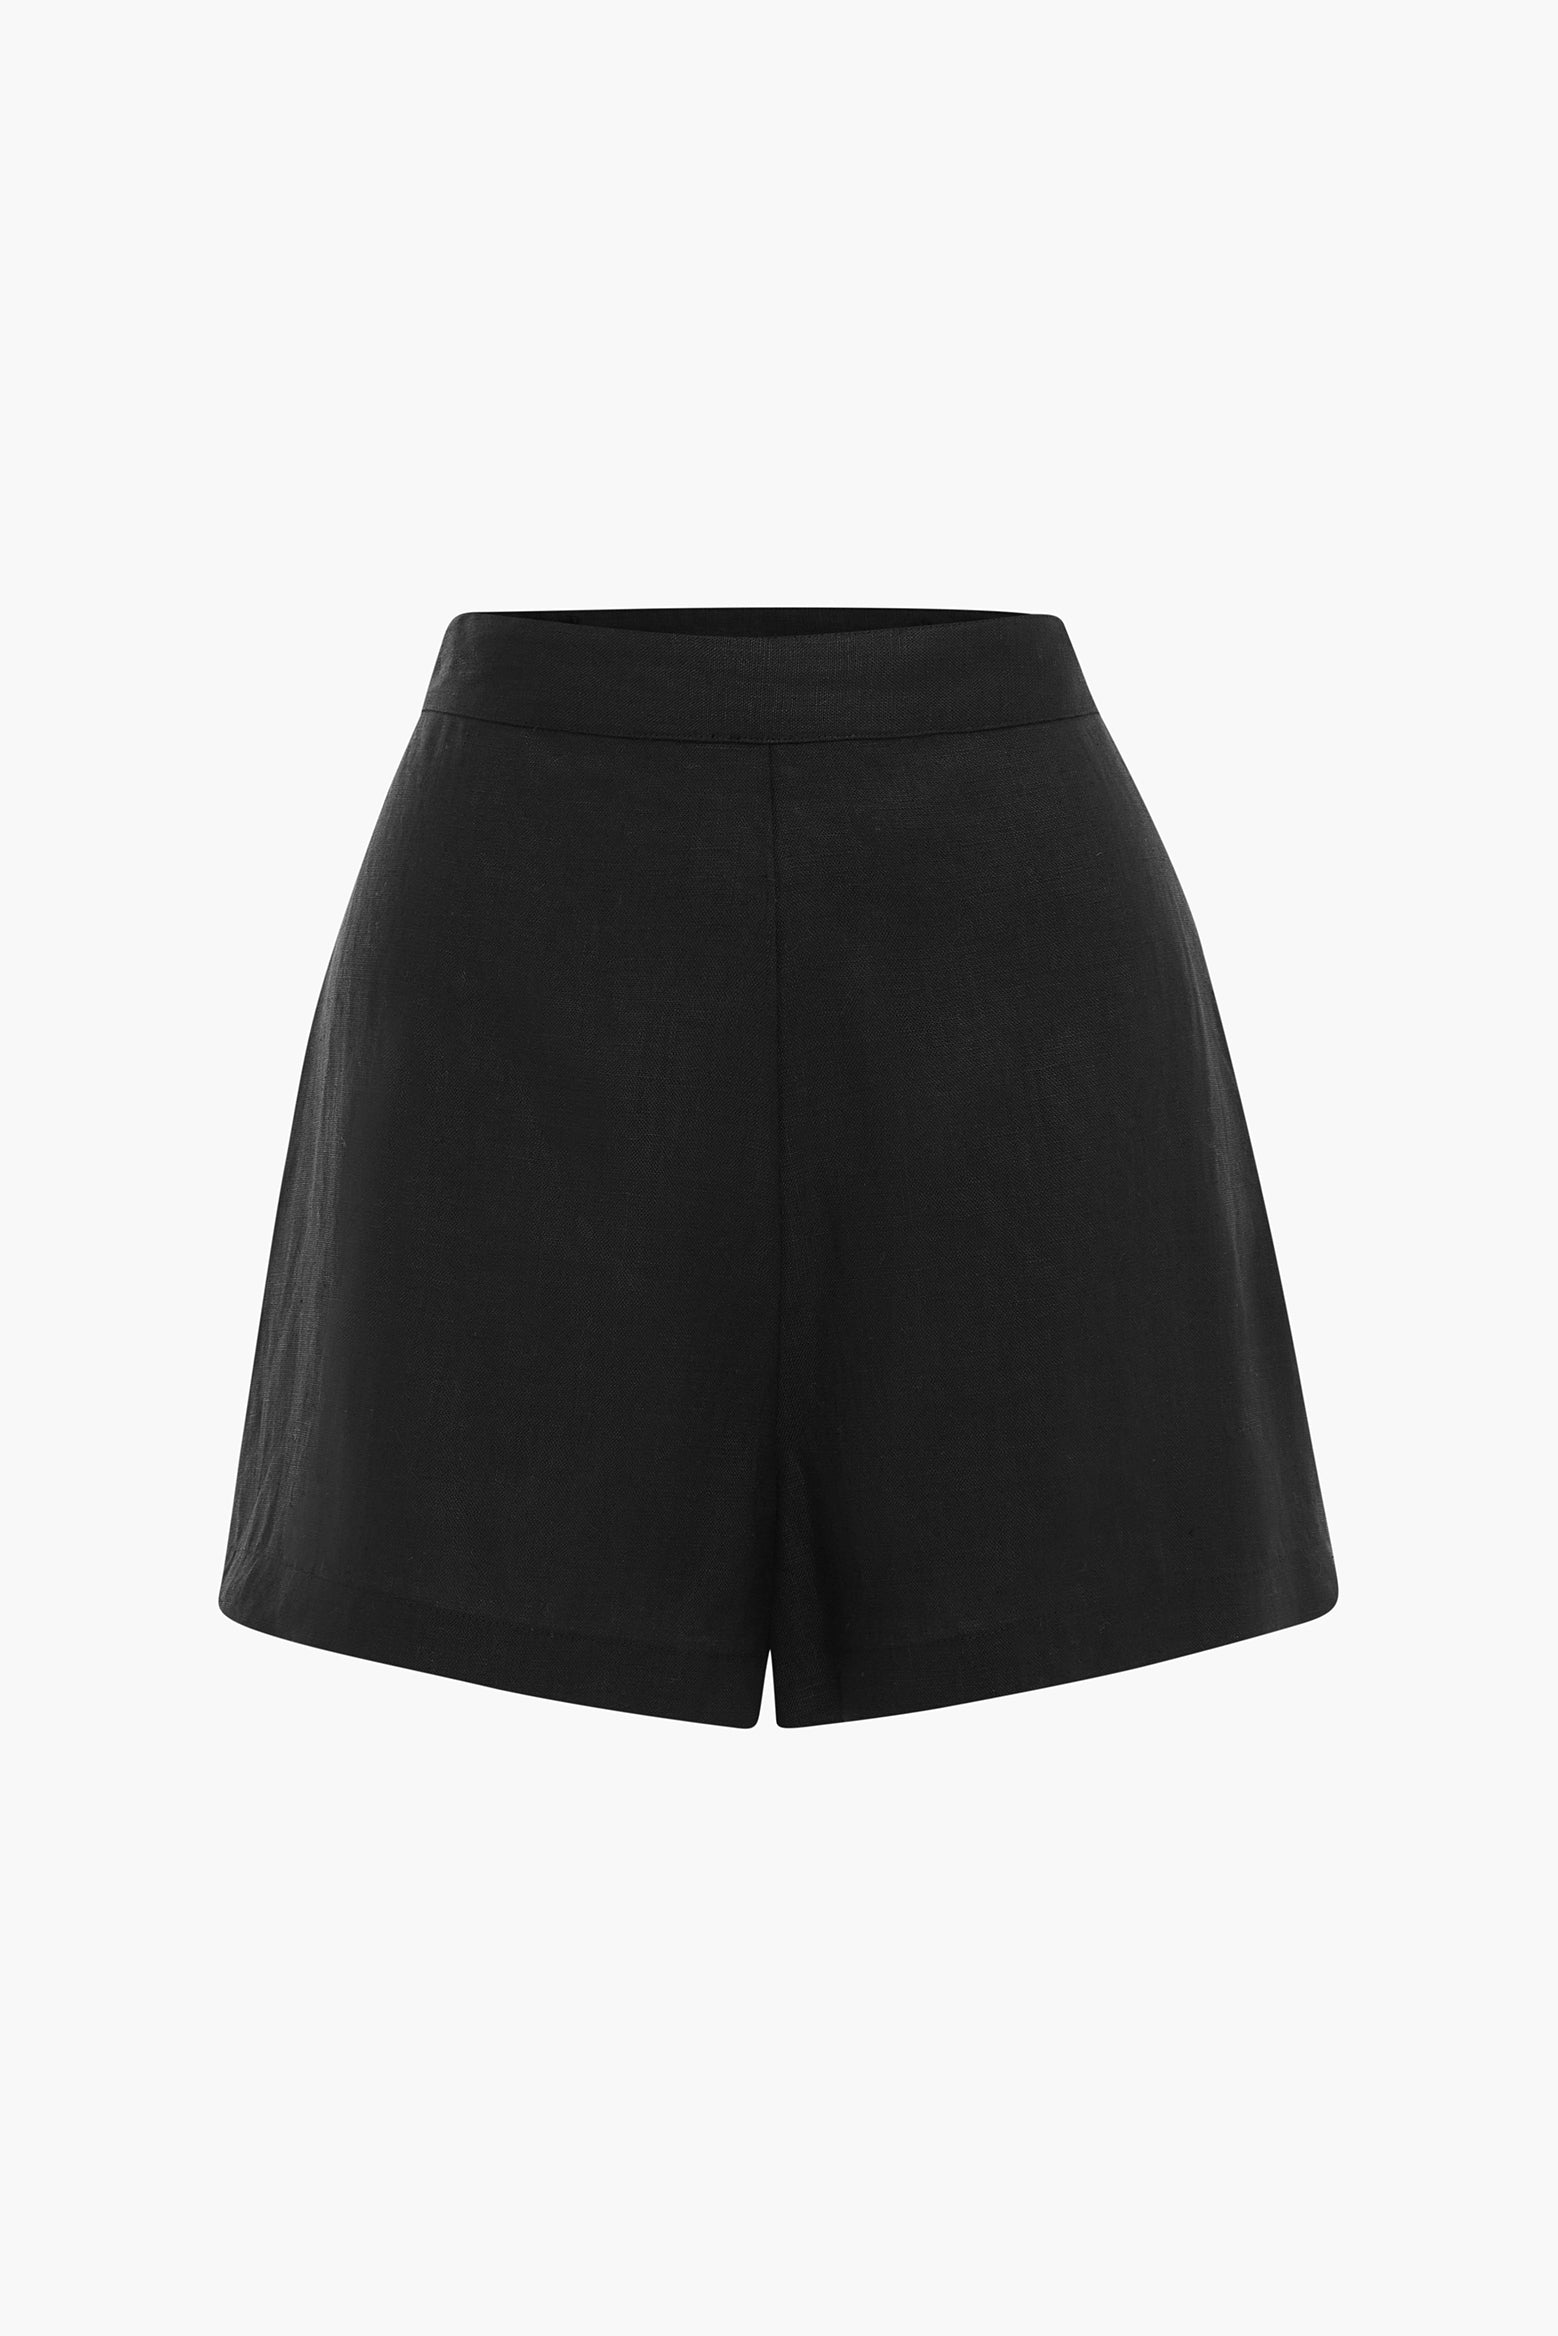 Posse Perri Short in Black available at The New Trend Australia.